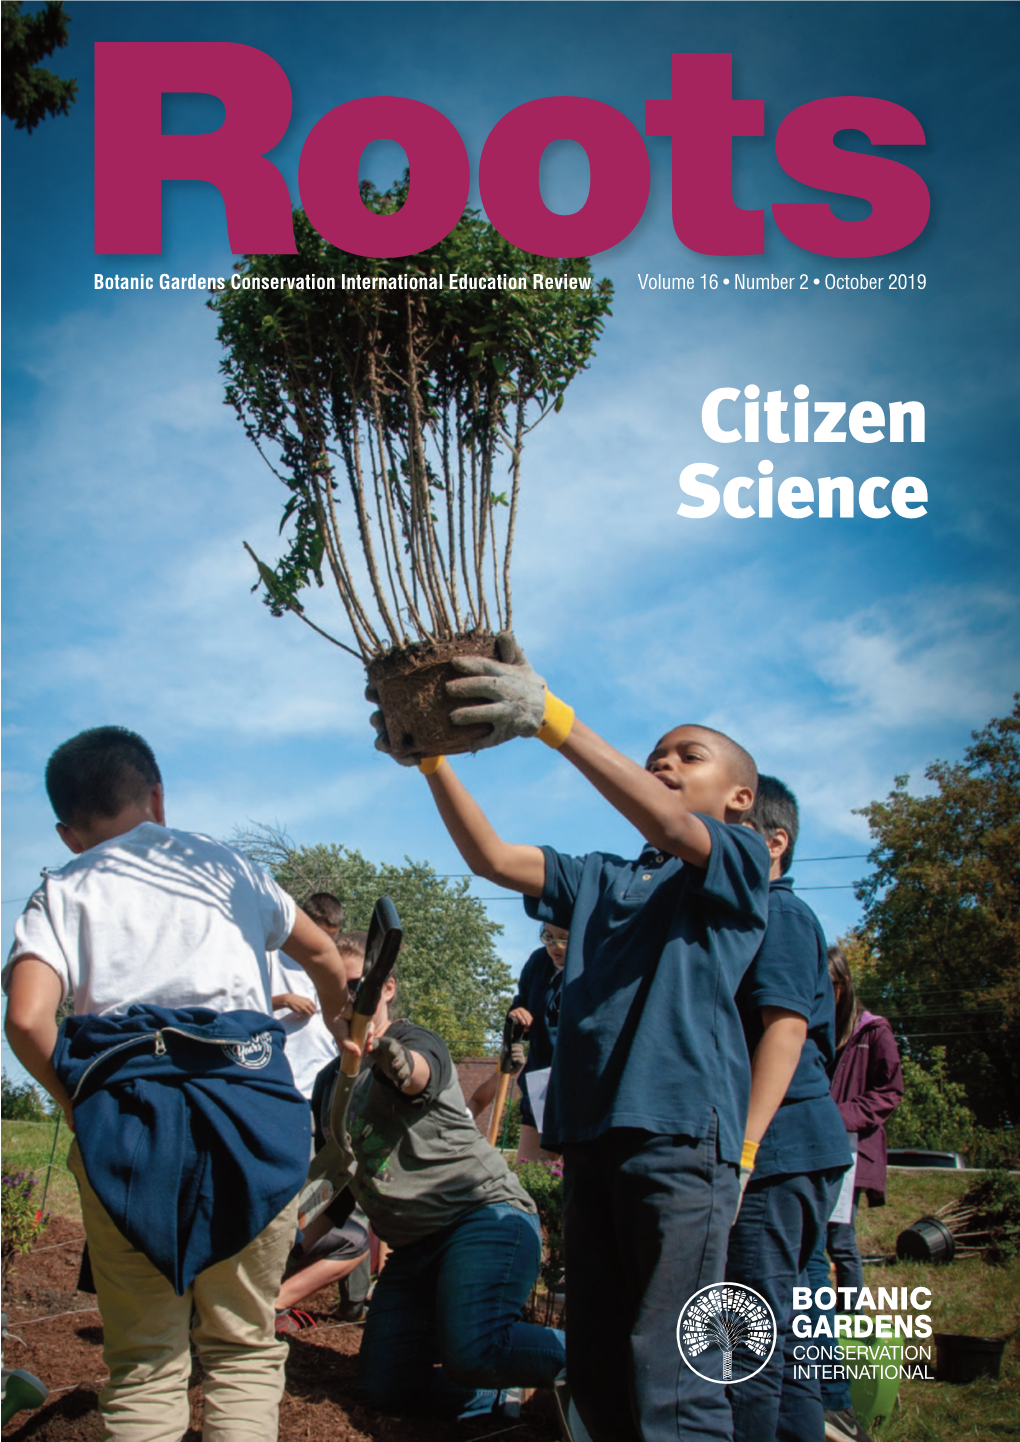 Citizen Science Contribute to the Next Issue of Roots